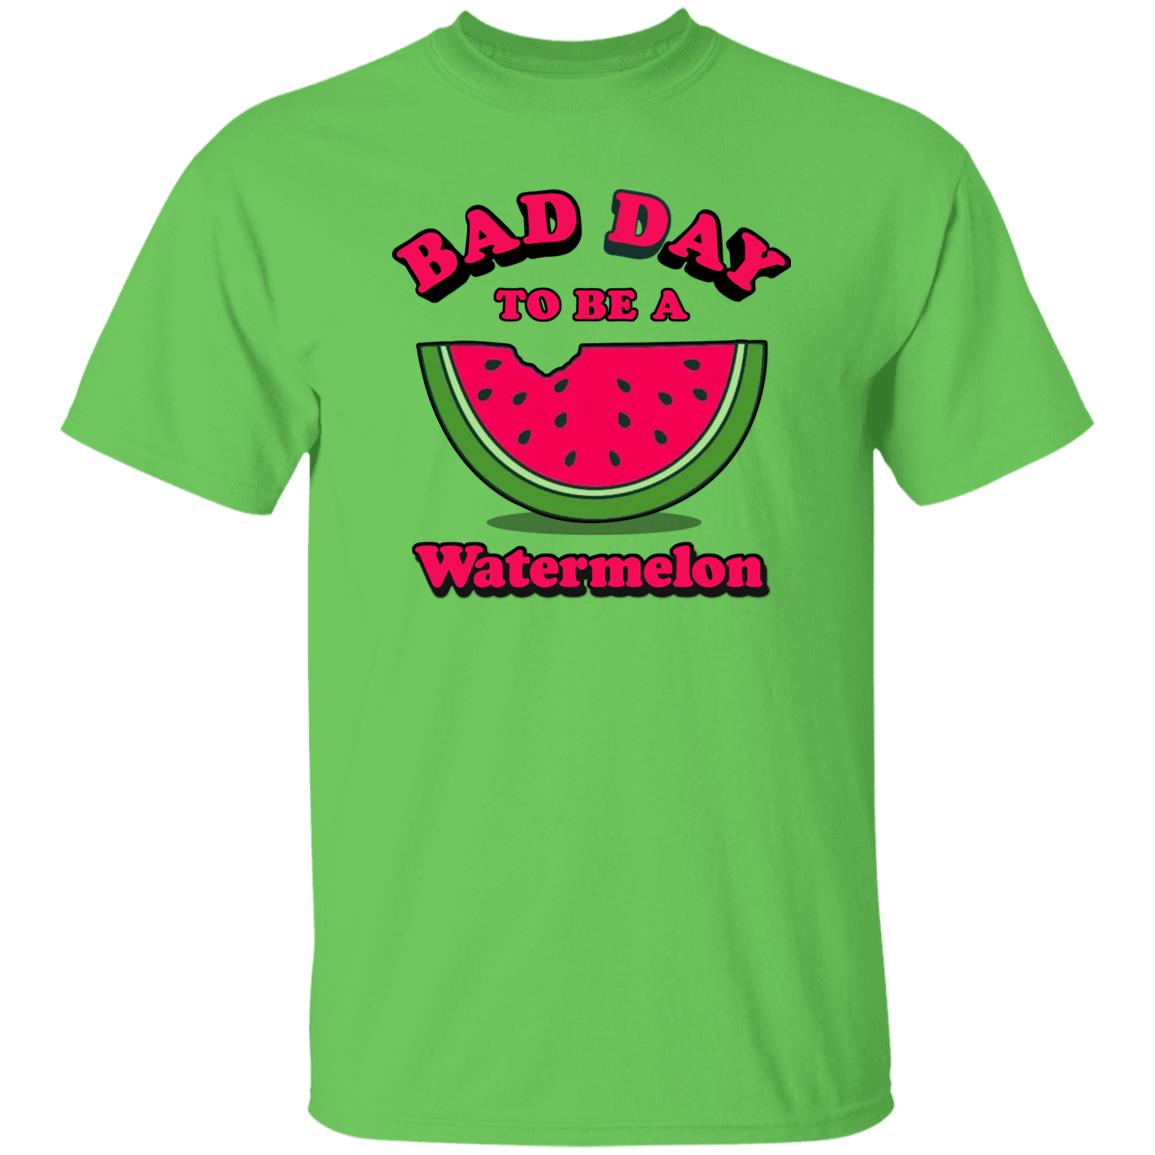 Dave Portnoy Bad Day To Be A Watermelon Shirt Barstool Sports Store